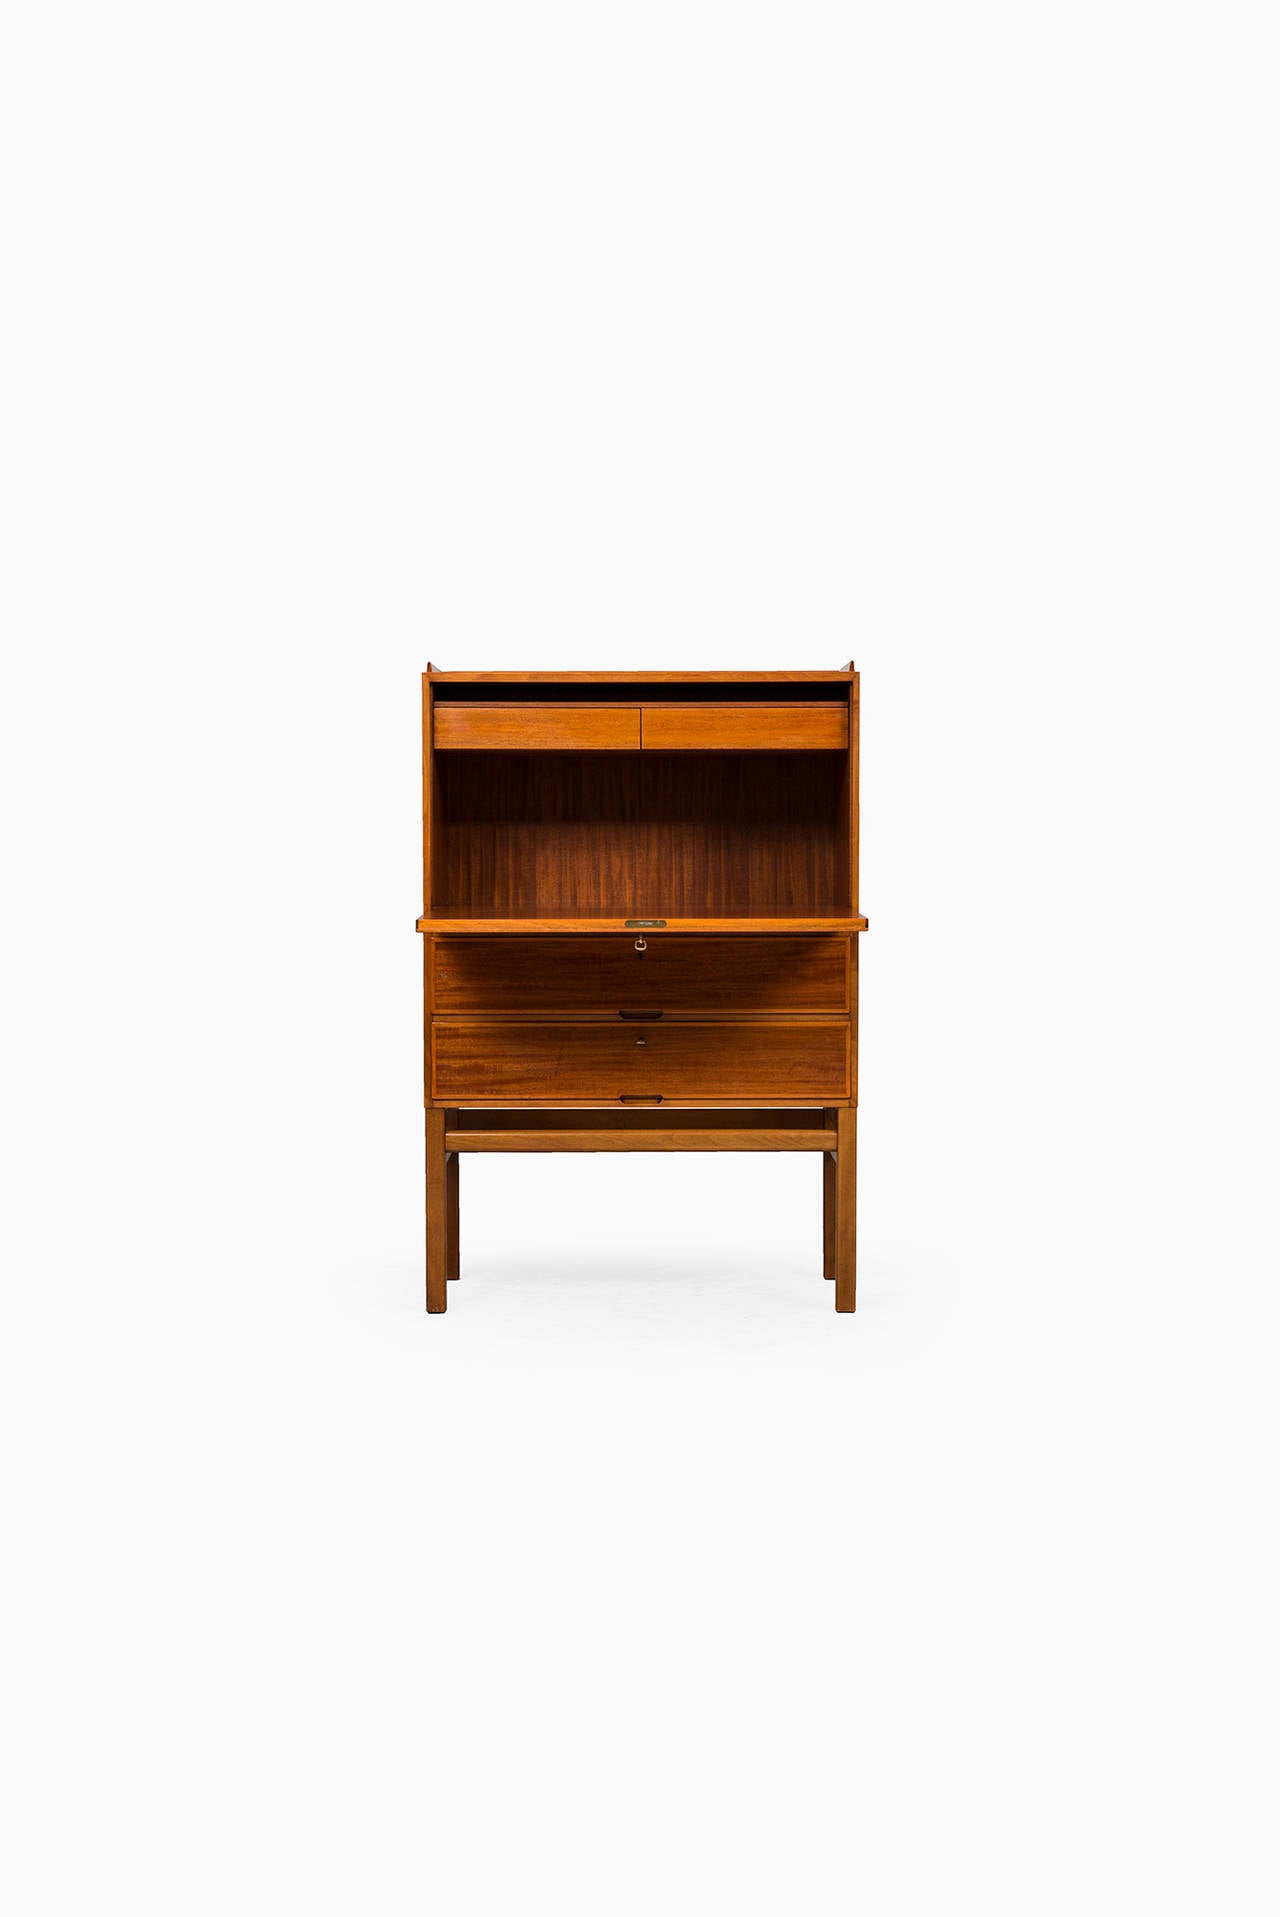 Axel Larsson cabinet / secretaire in mahogany by Bodafors in Sweden In Excellent Condition In Limhamn, Skåne län